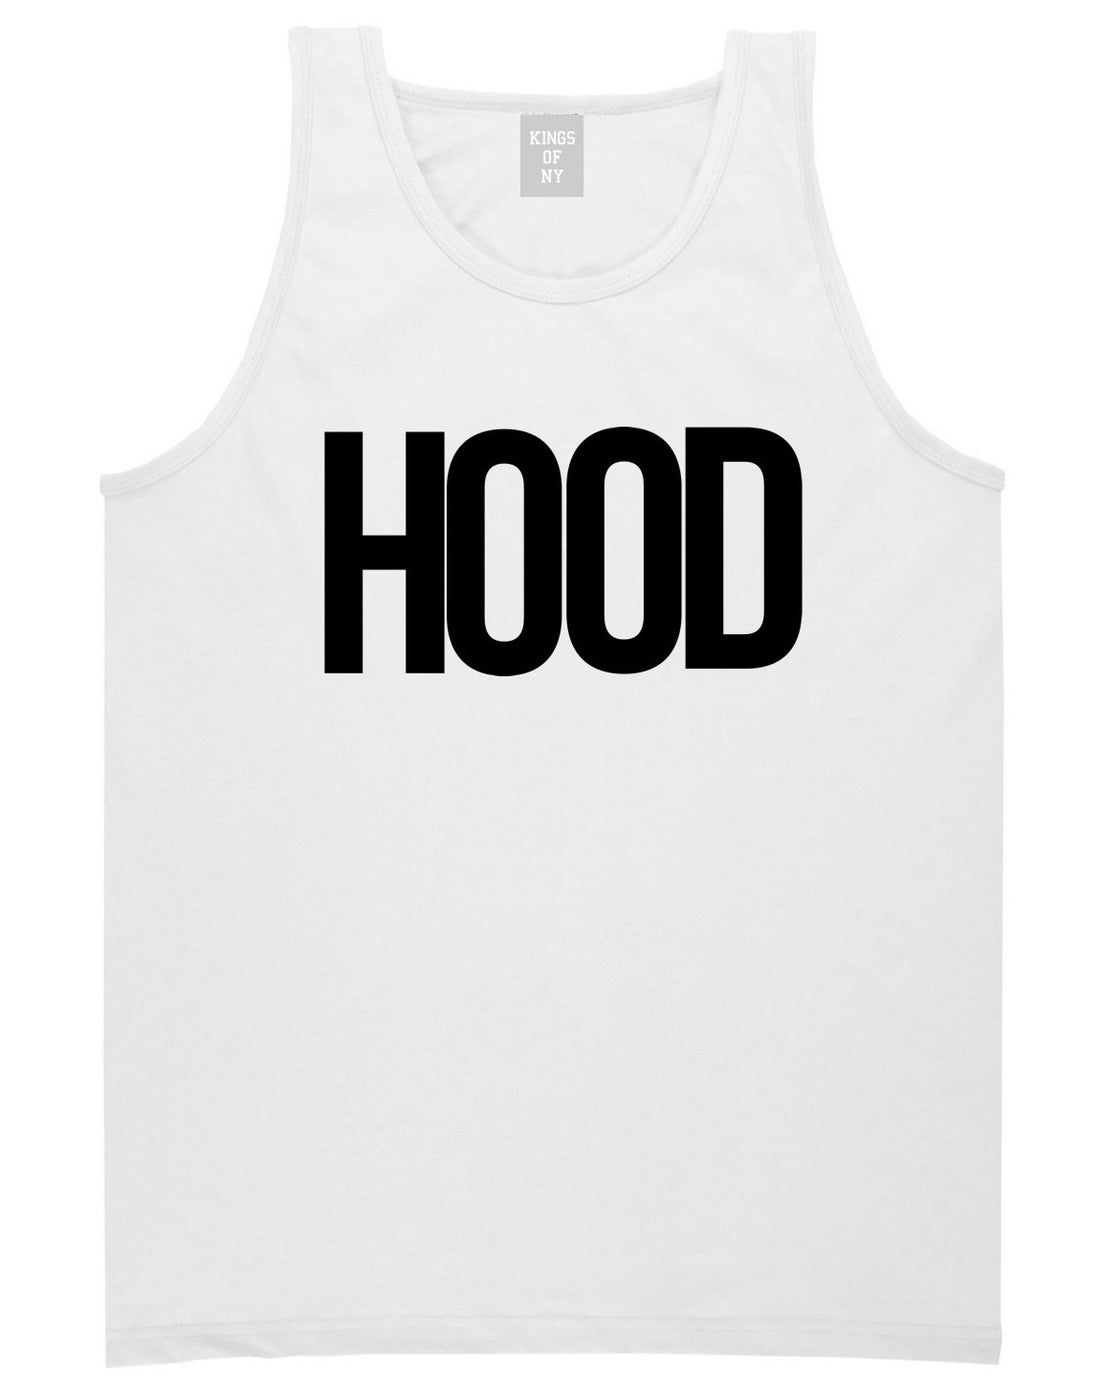 Hood Trap Style Compton New York Air Tank Top In White by Kings Of NY